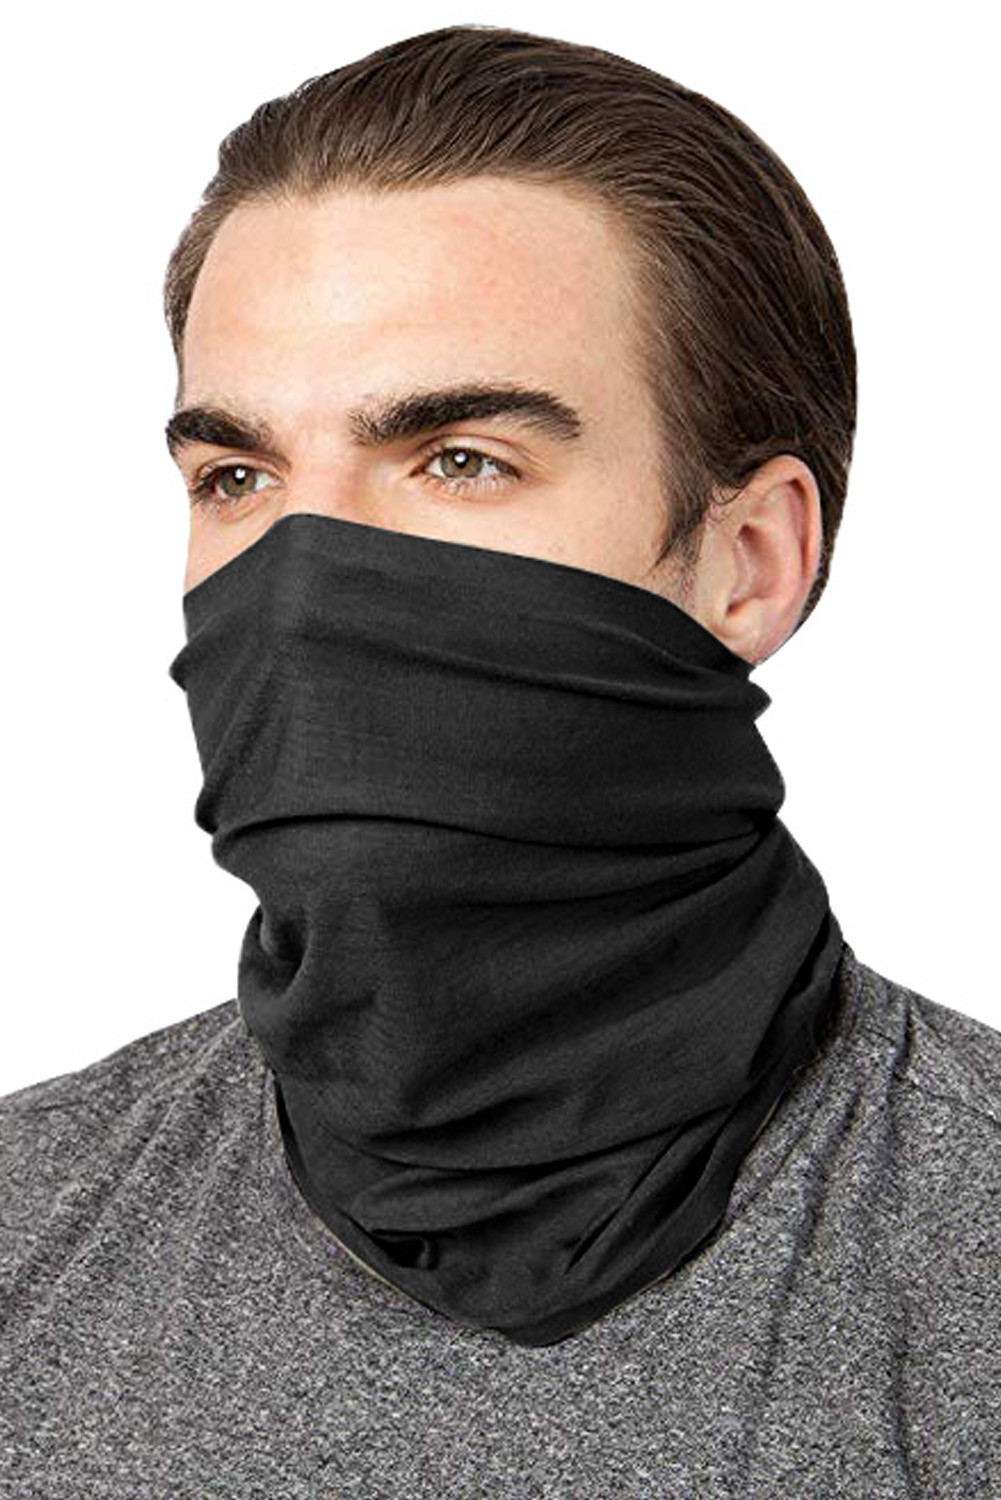 US$ 1.95 Black Outdoor Cycling Climming Neck Gaiter Face Mask Wholesale